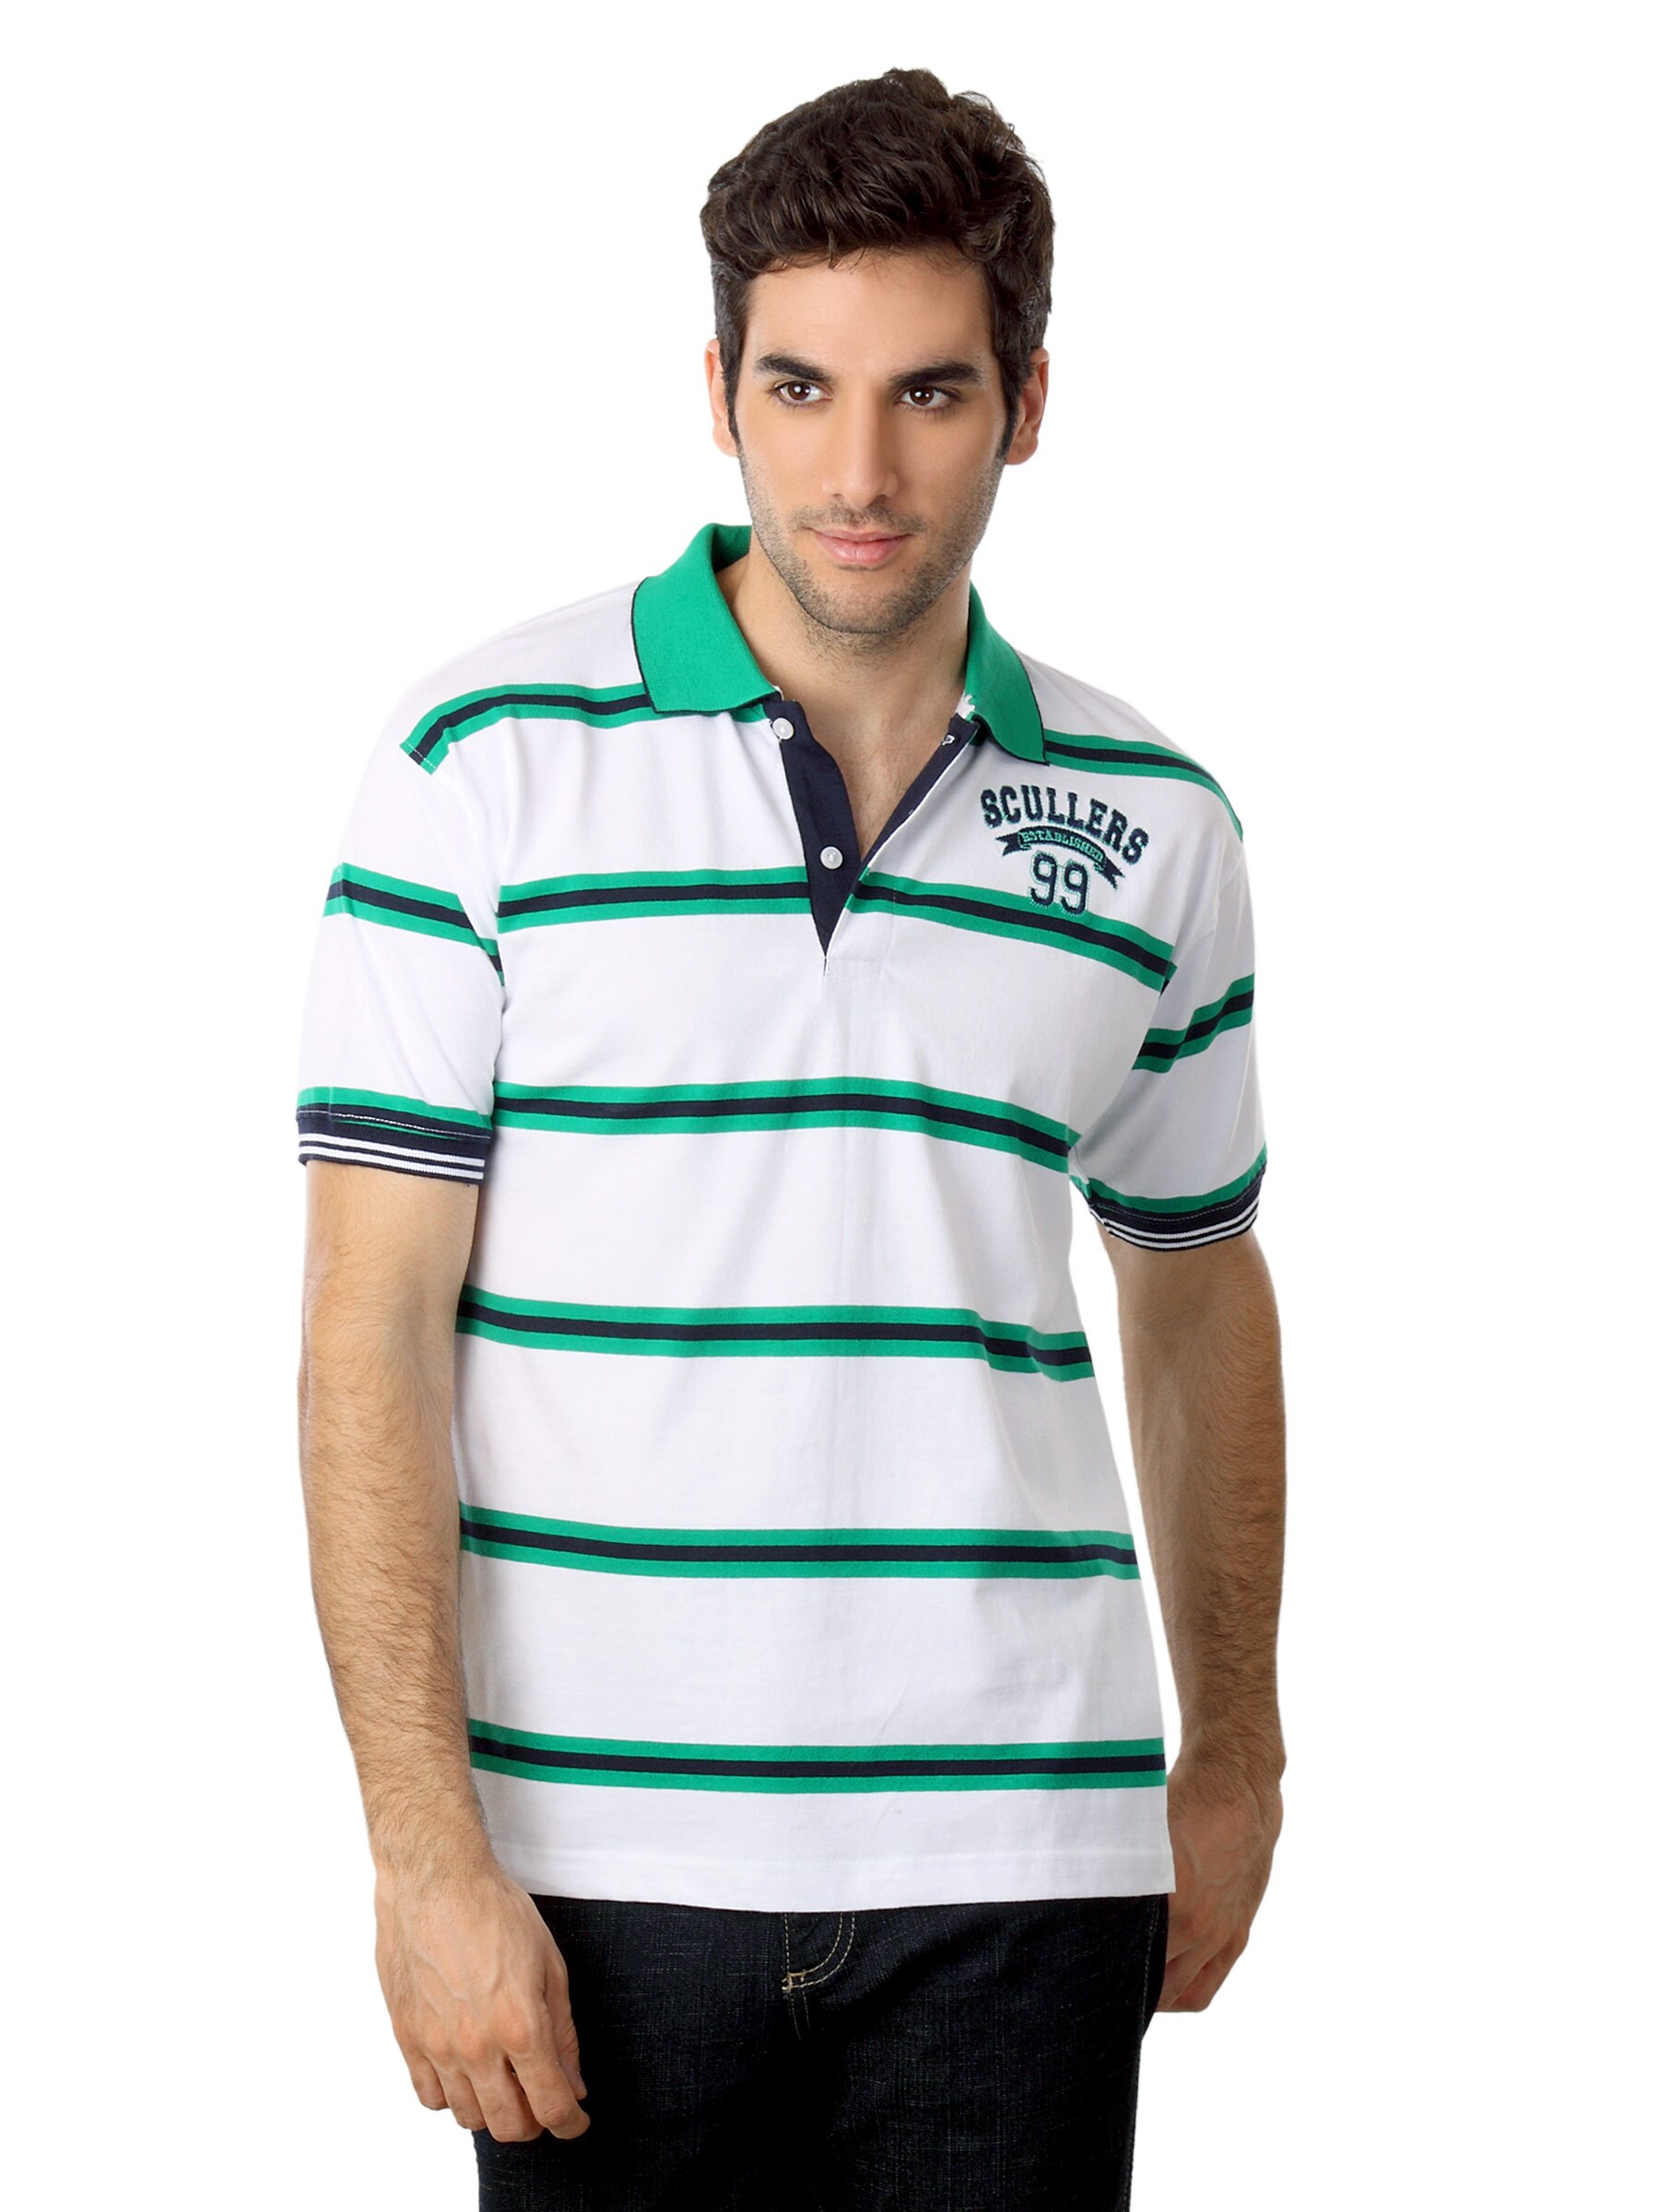 Scullers Men White & Green Striped T-shirt